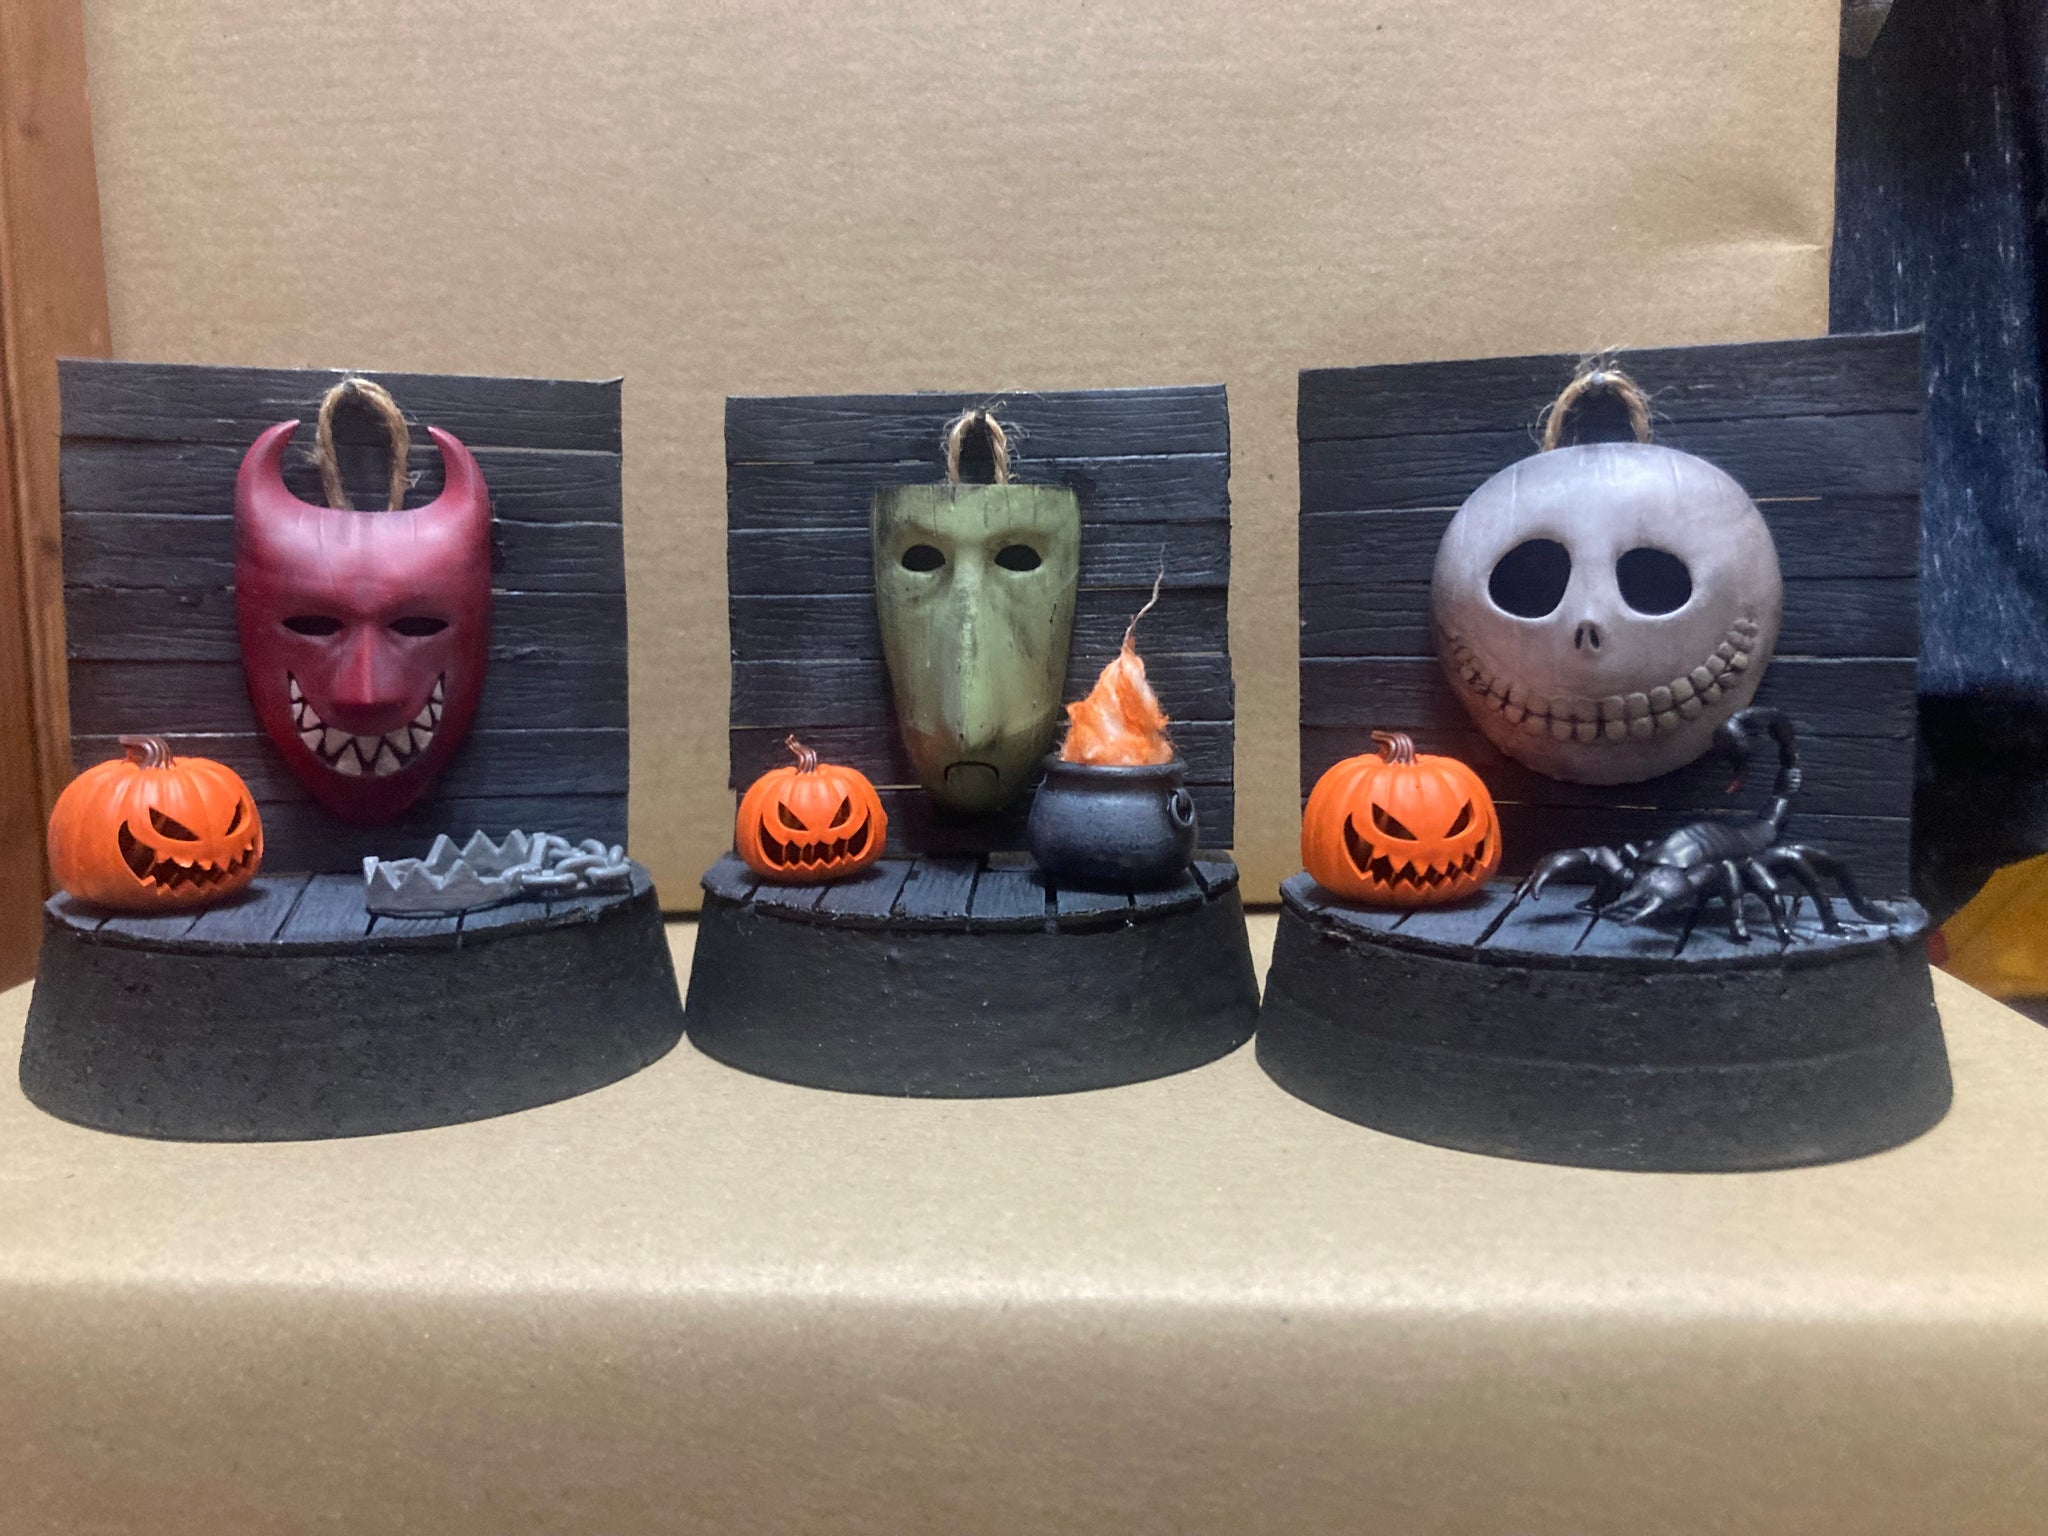 Lock, Shock and Barrel Masks (Set of 3 Cloches) - Nightmare Before Christmas Inspired